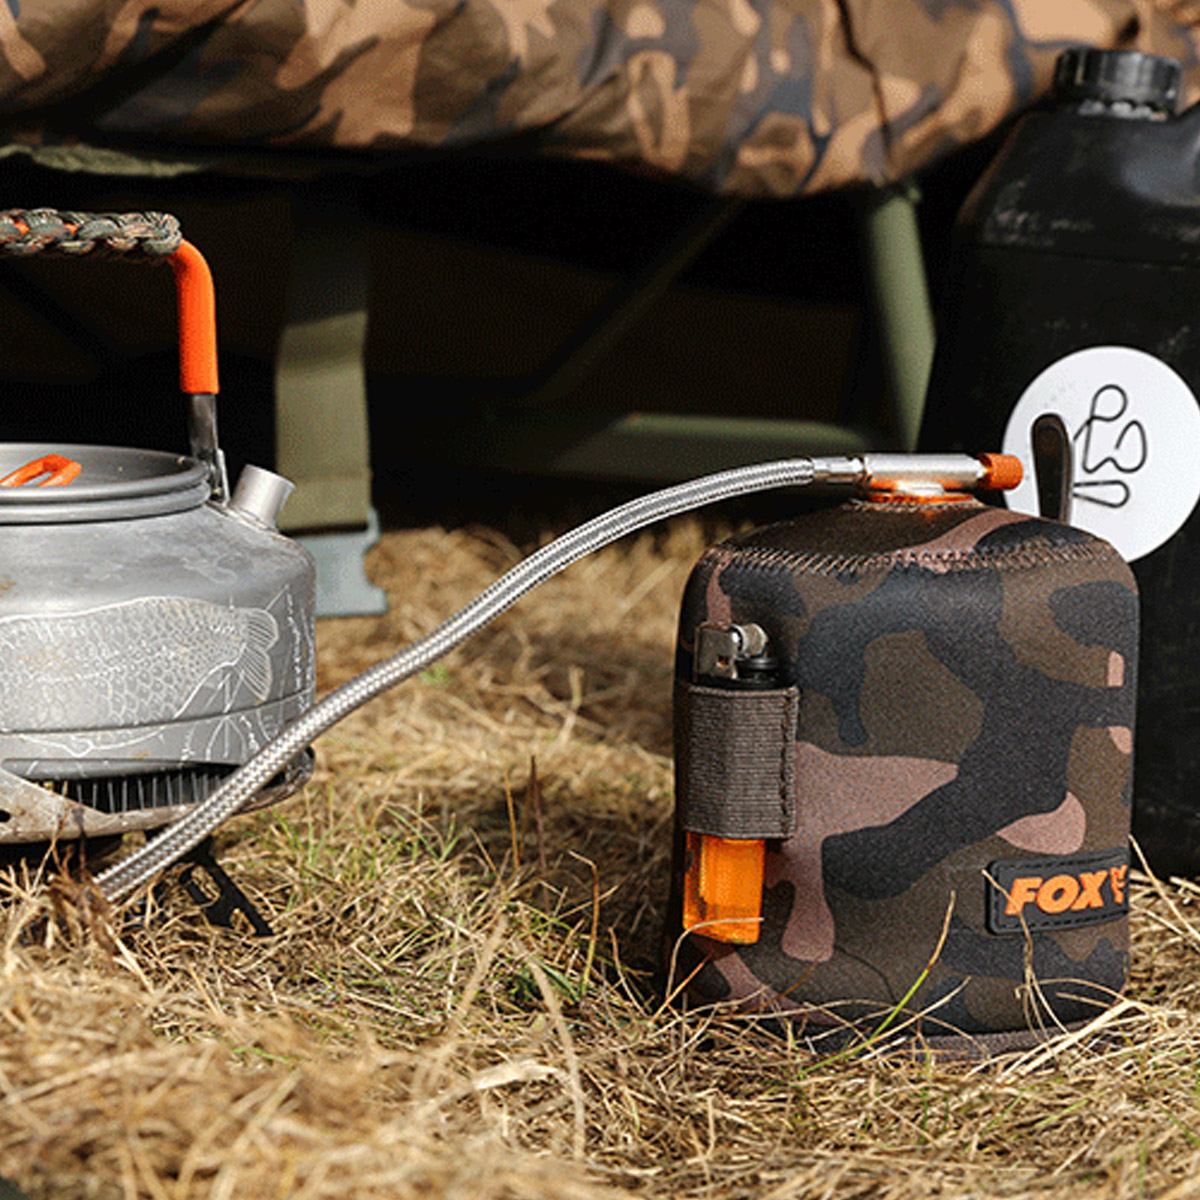 Fox Camo Neoprene Gas Cannister Cover